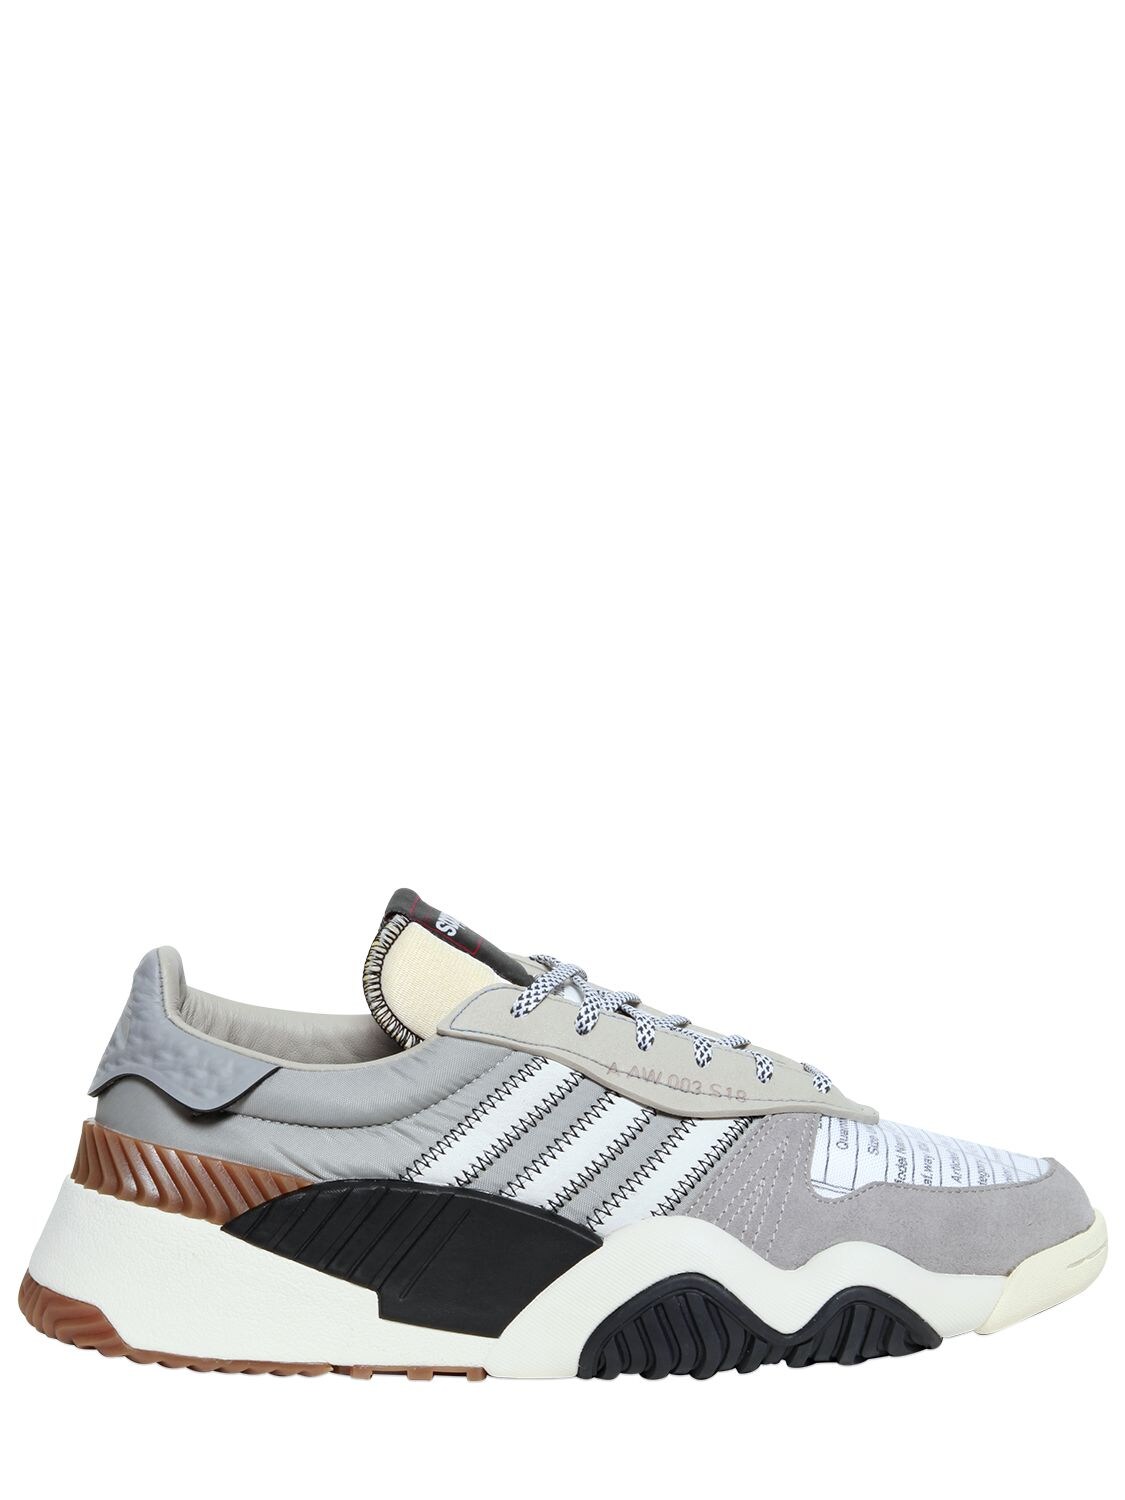 Adidas Originals By Alexander Wang Aw Product Details Mesh Sneakers In Grey/brown